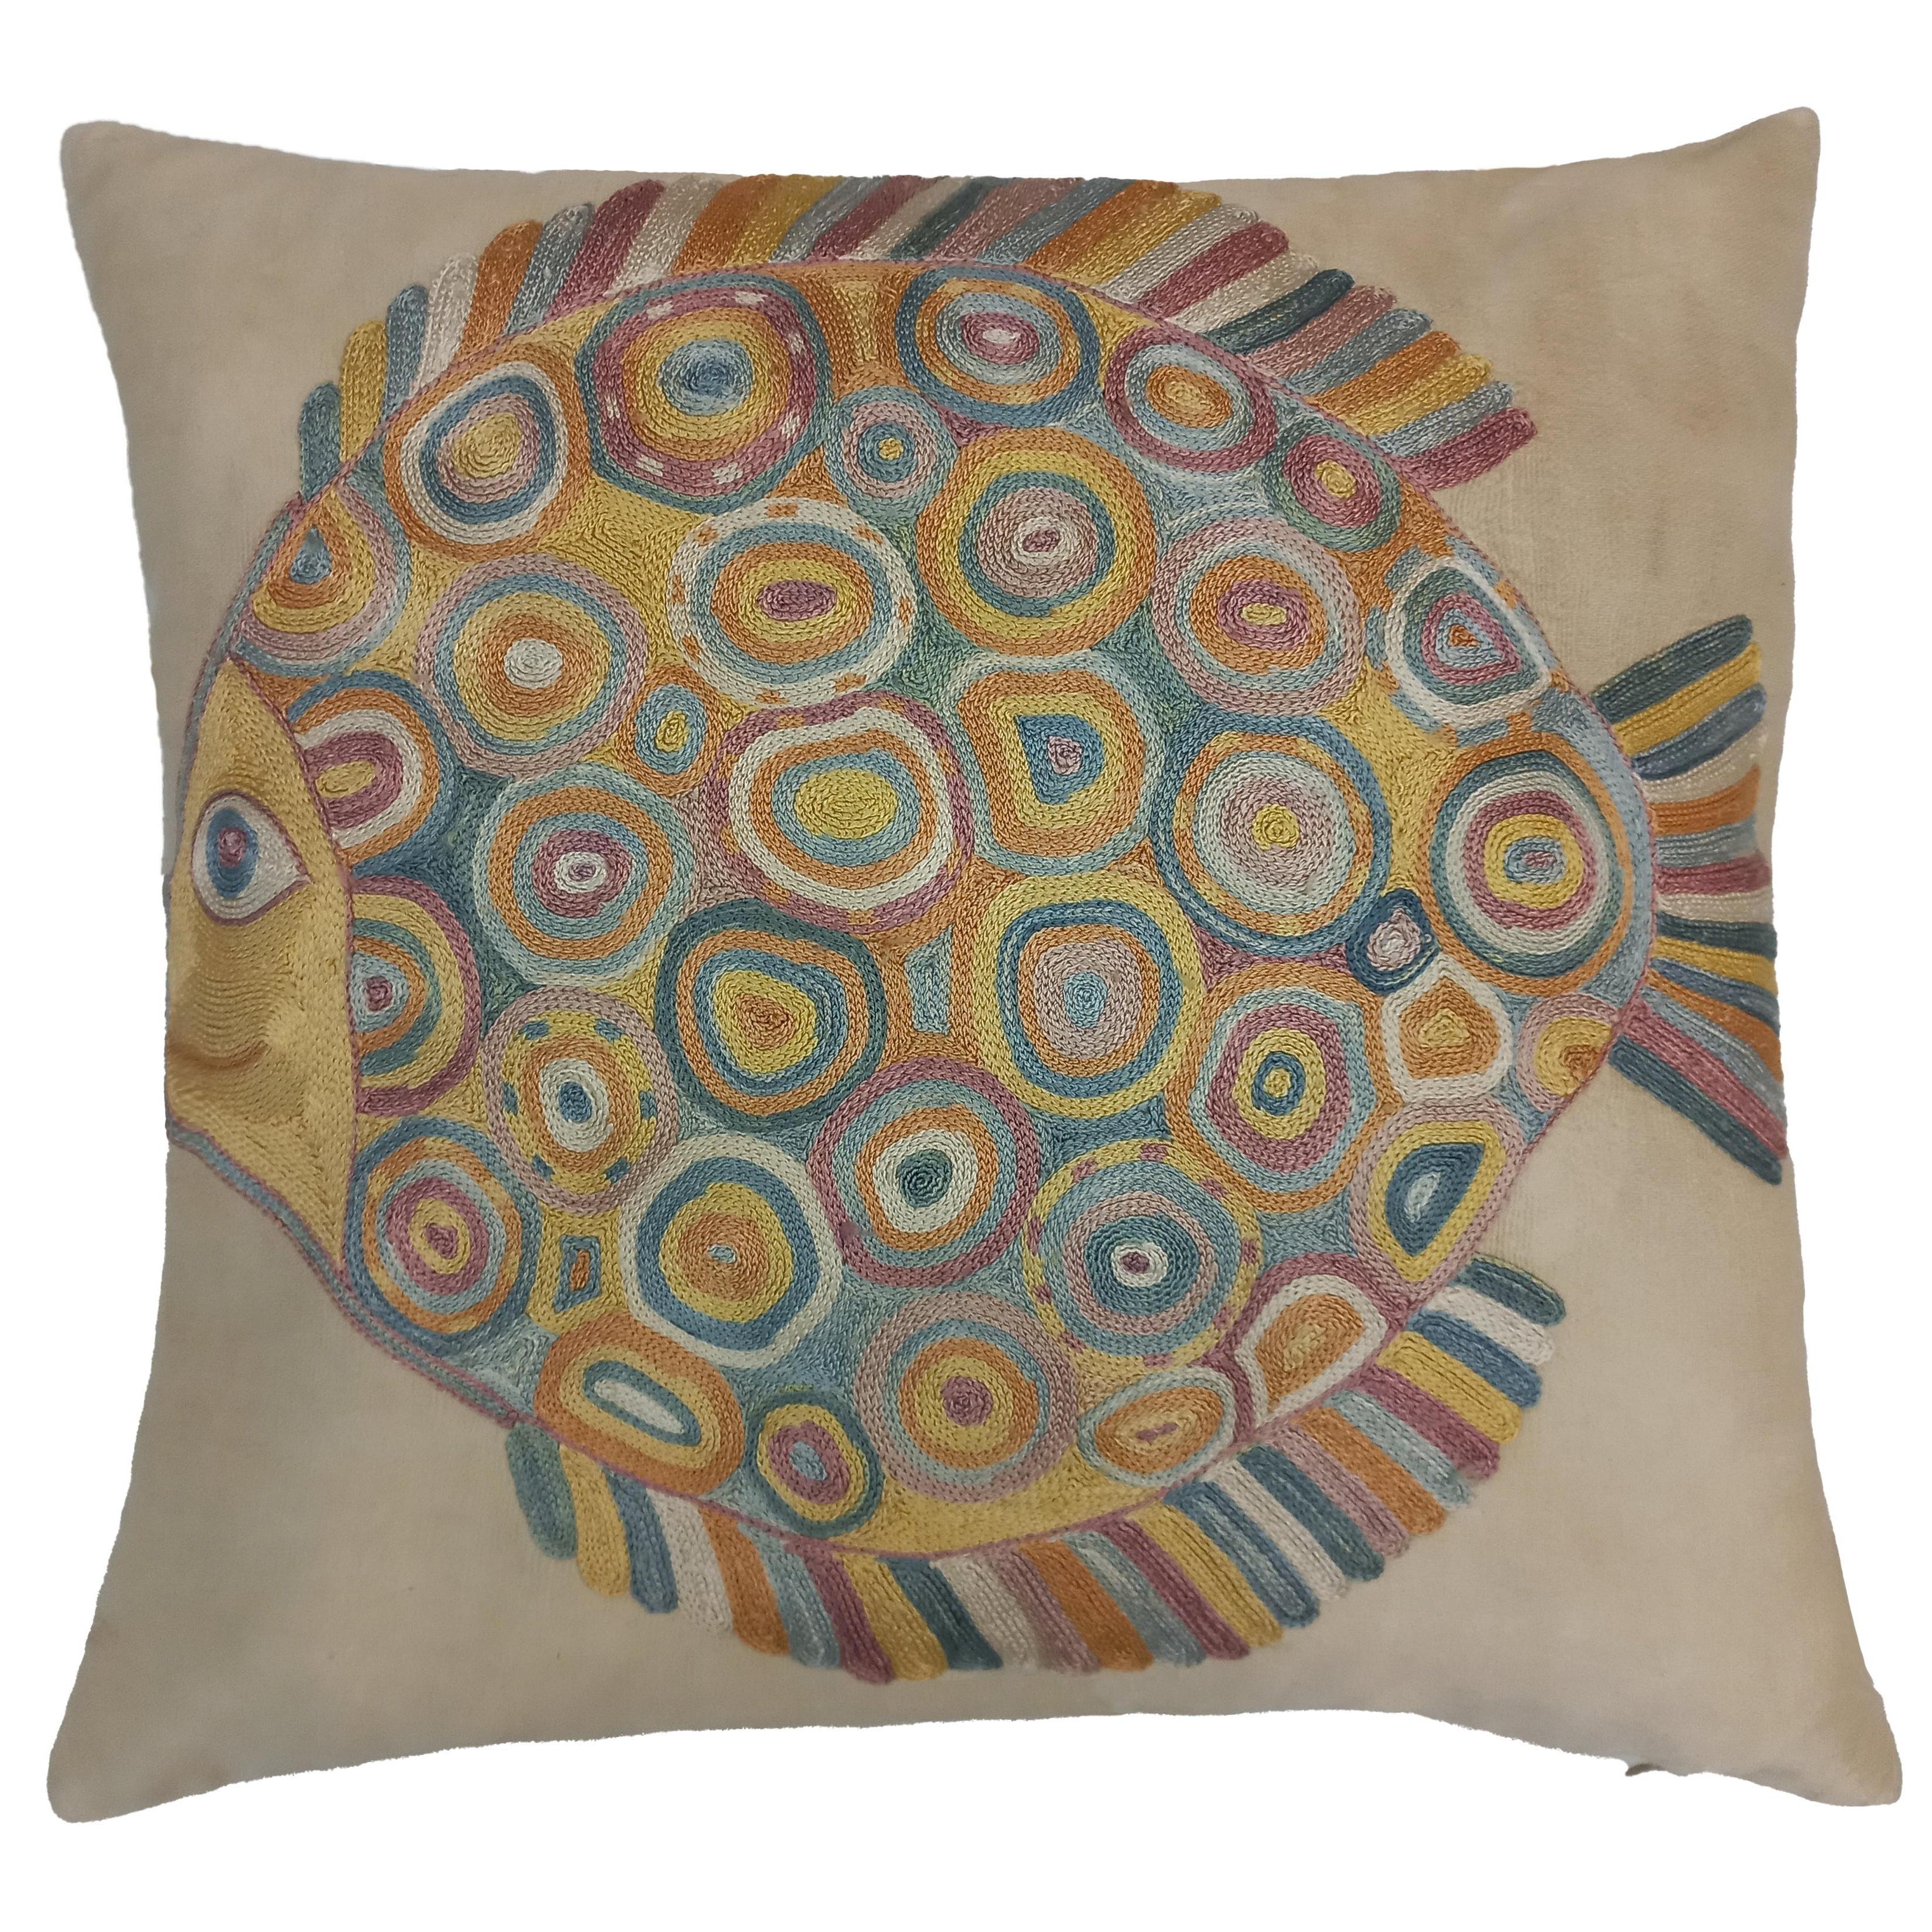 19"x20" 100% Silk Embroidered Suzani Cushion Cover, Fish Patterned Toss Pillow